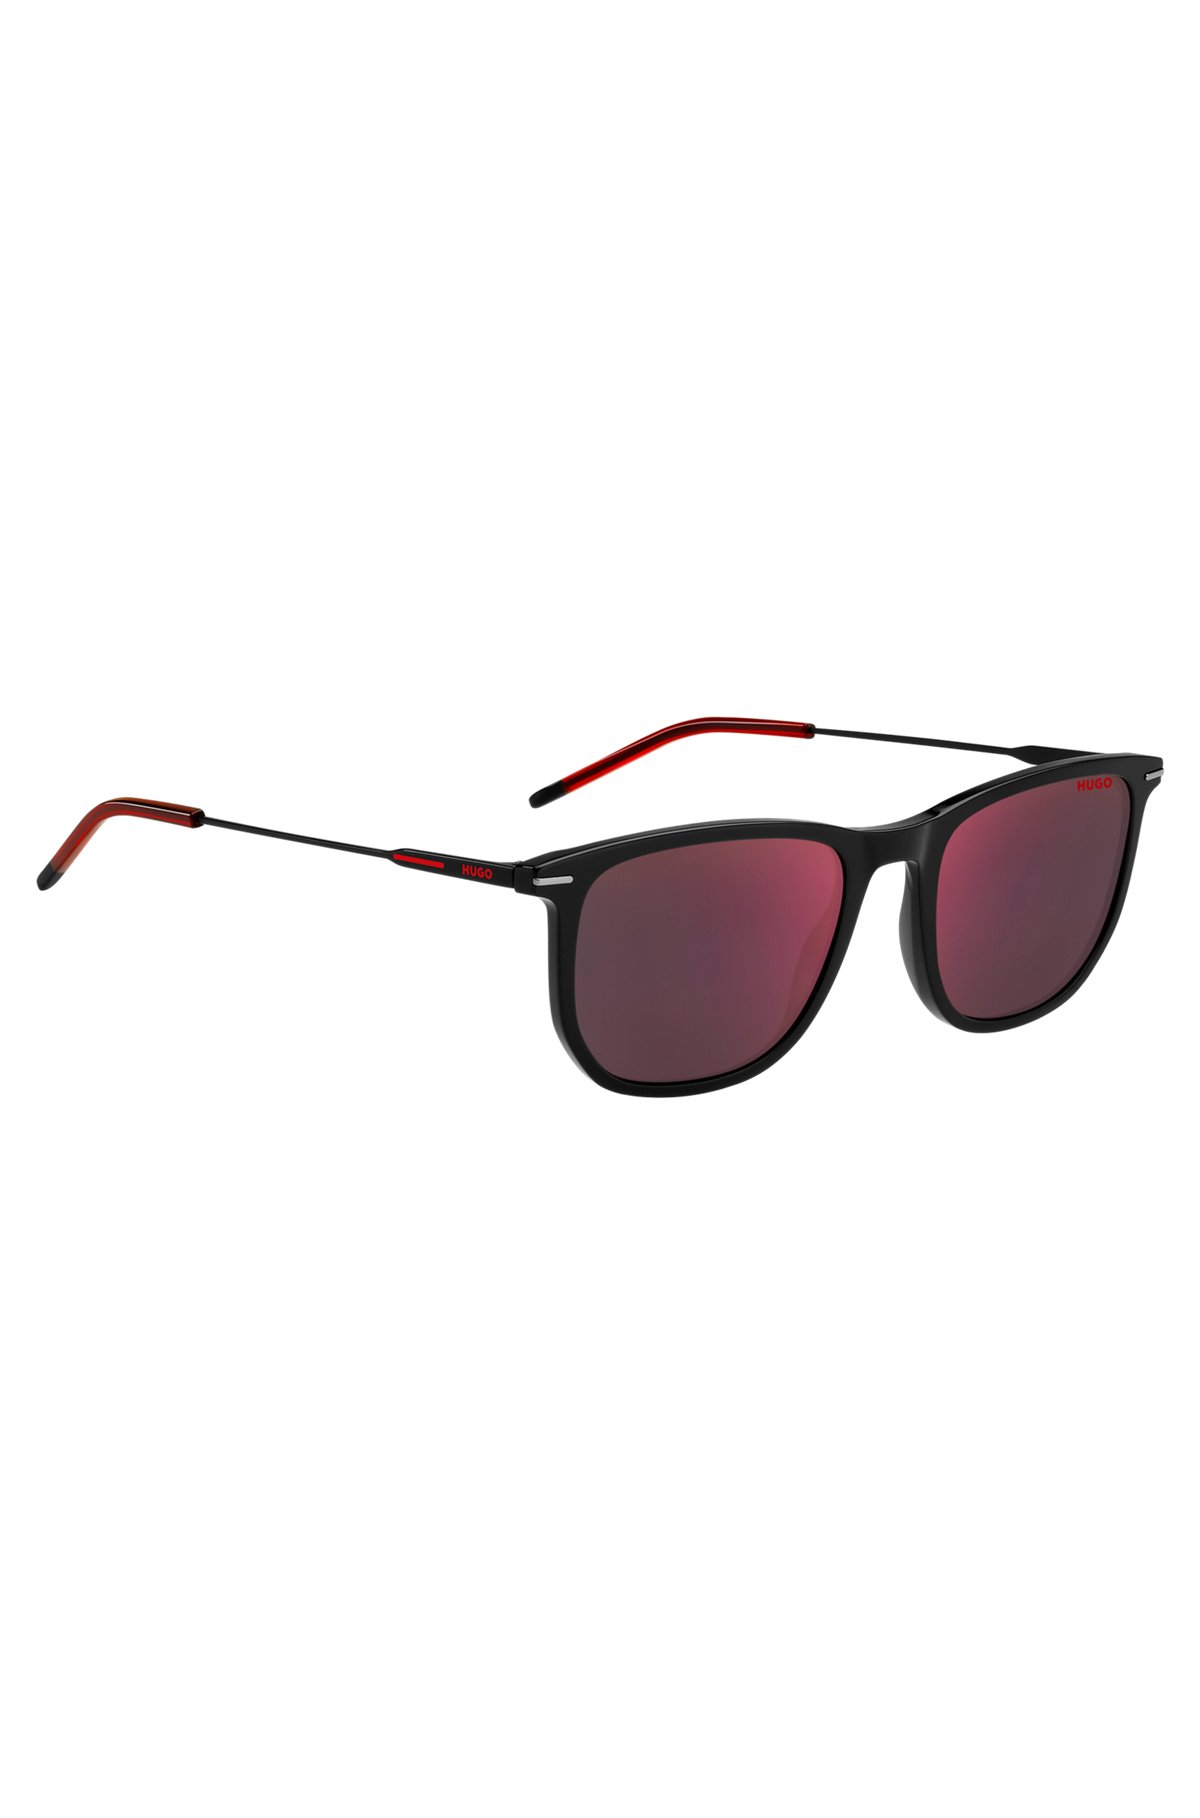 Black-acetate sunglasses with red details, Black Patterned